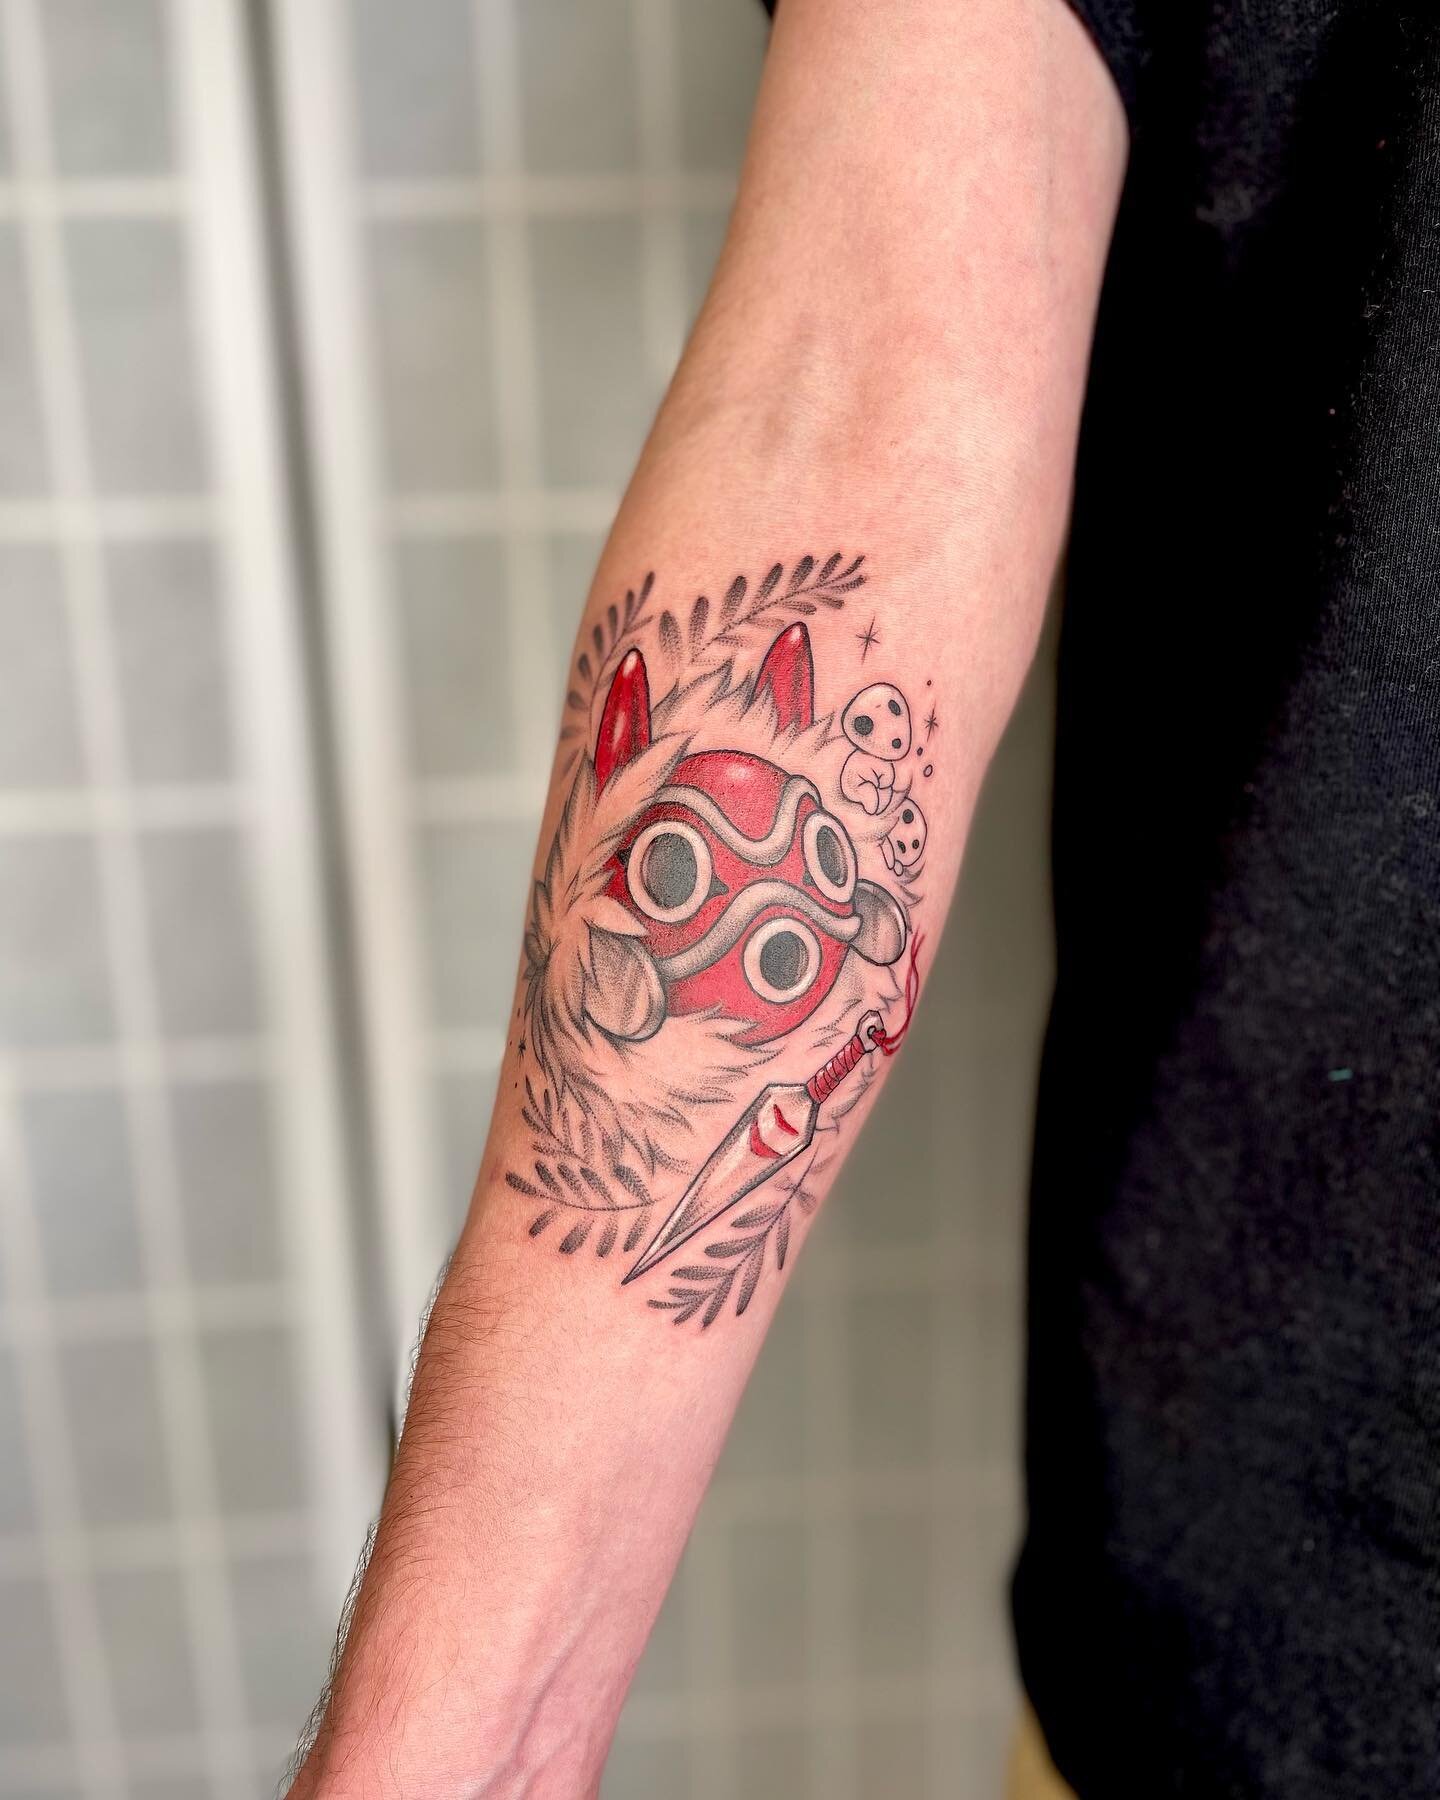 Princess Mononoke Mask 👹 
Happy Wednesday my dudes! A tat from last Walk-in Wednesday, thank you Dalton! Come by the shop on Wednesdays at 12pm I&rsquo;ll be there! I love doing these smaller pieces that don&rsquo;t require an appointment 🥰 anime, 